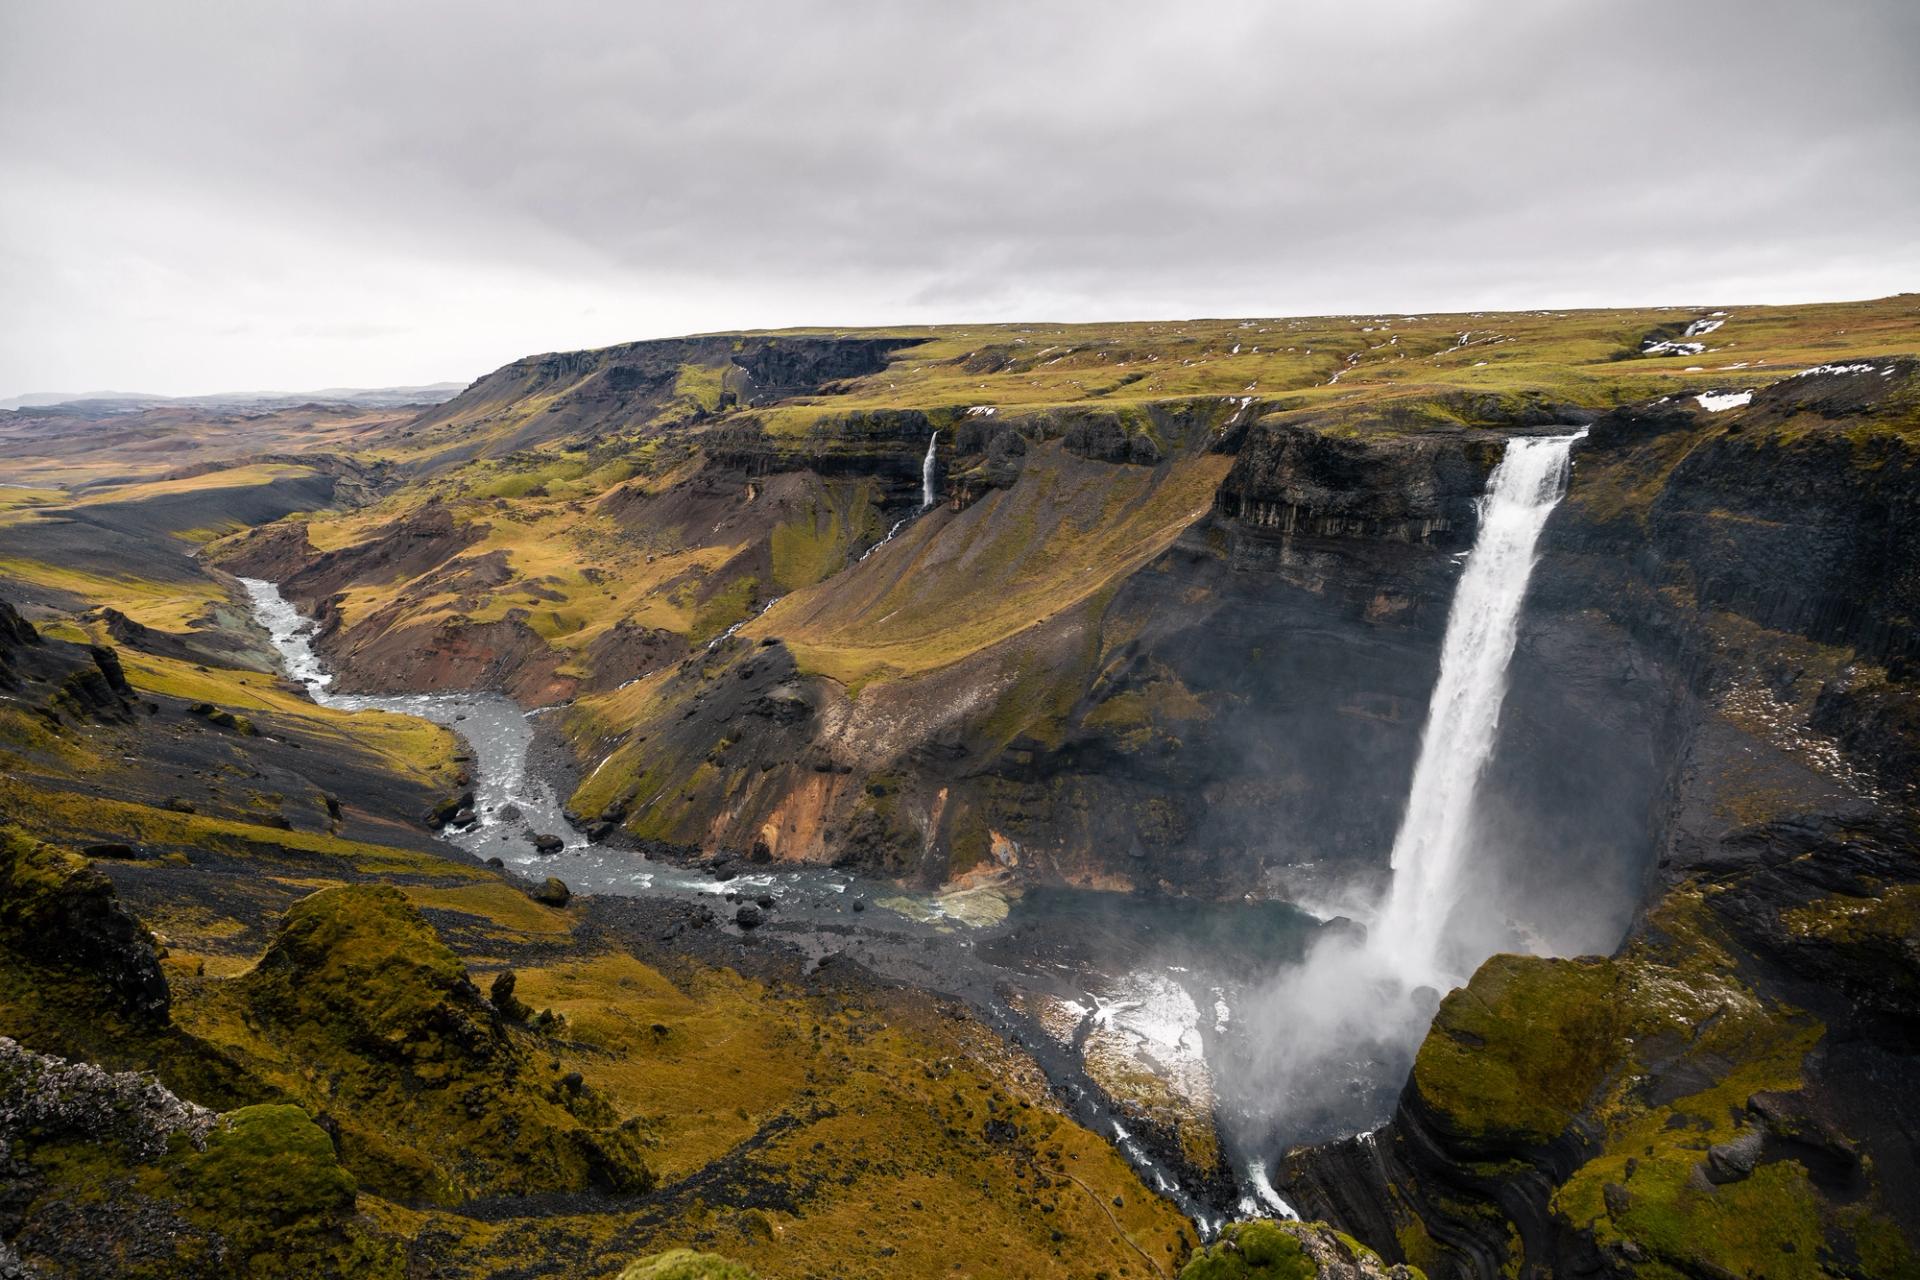 Háifoss waterfall plunging into a deep canyon with dramatic landscape